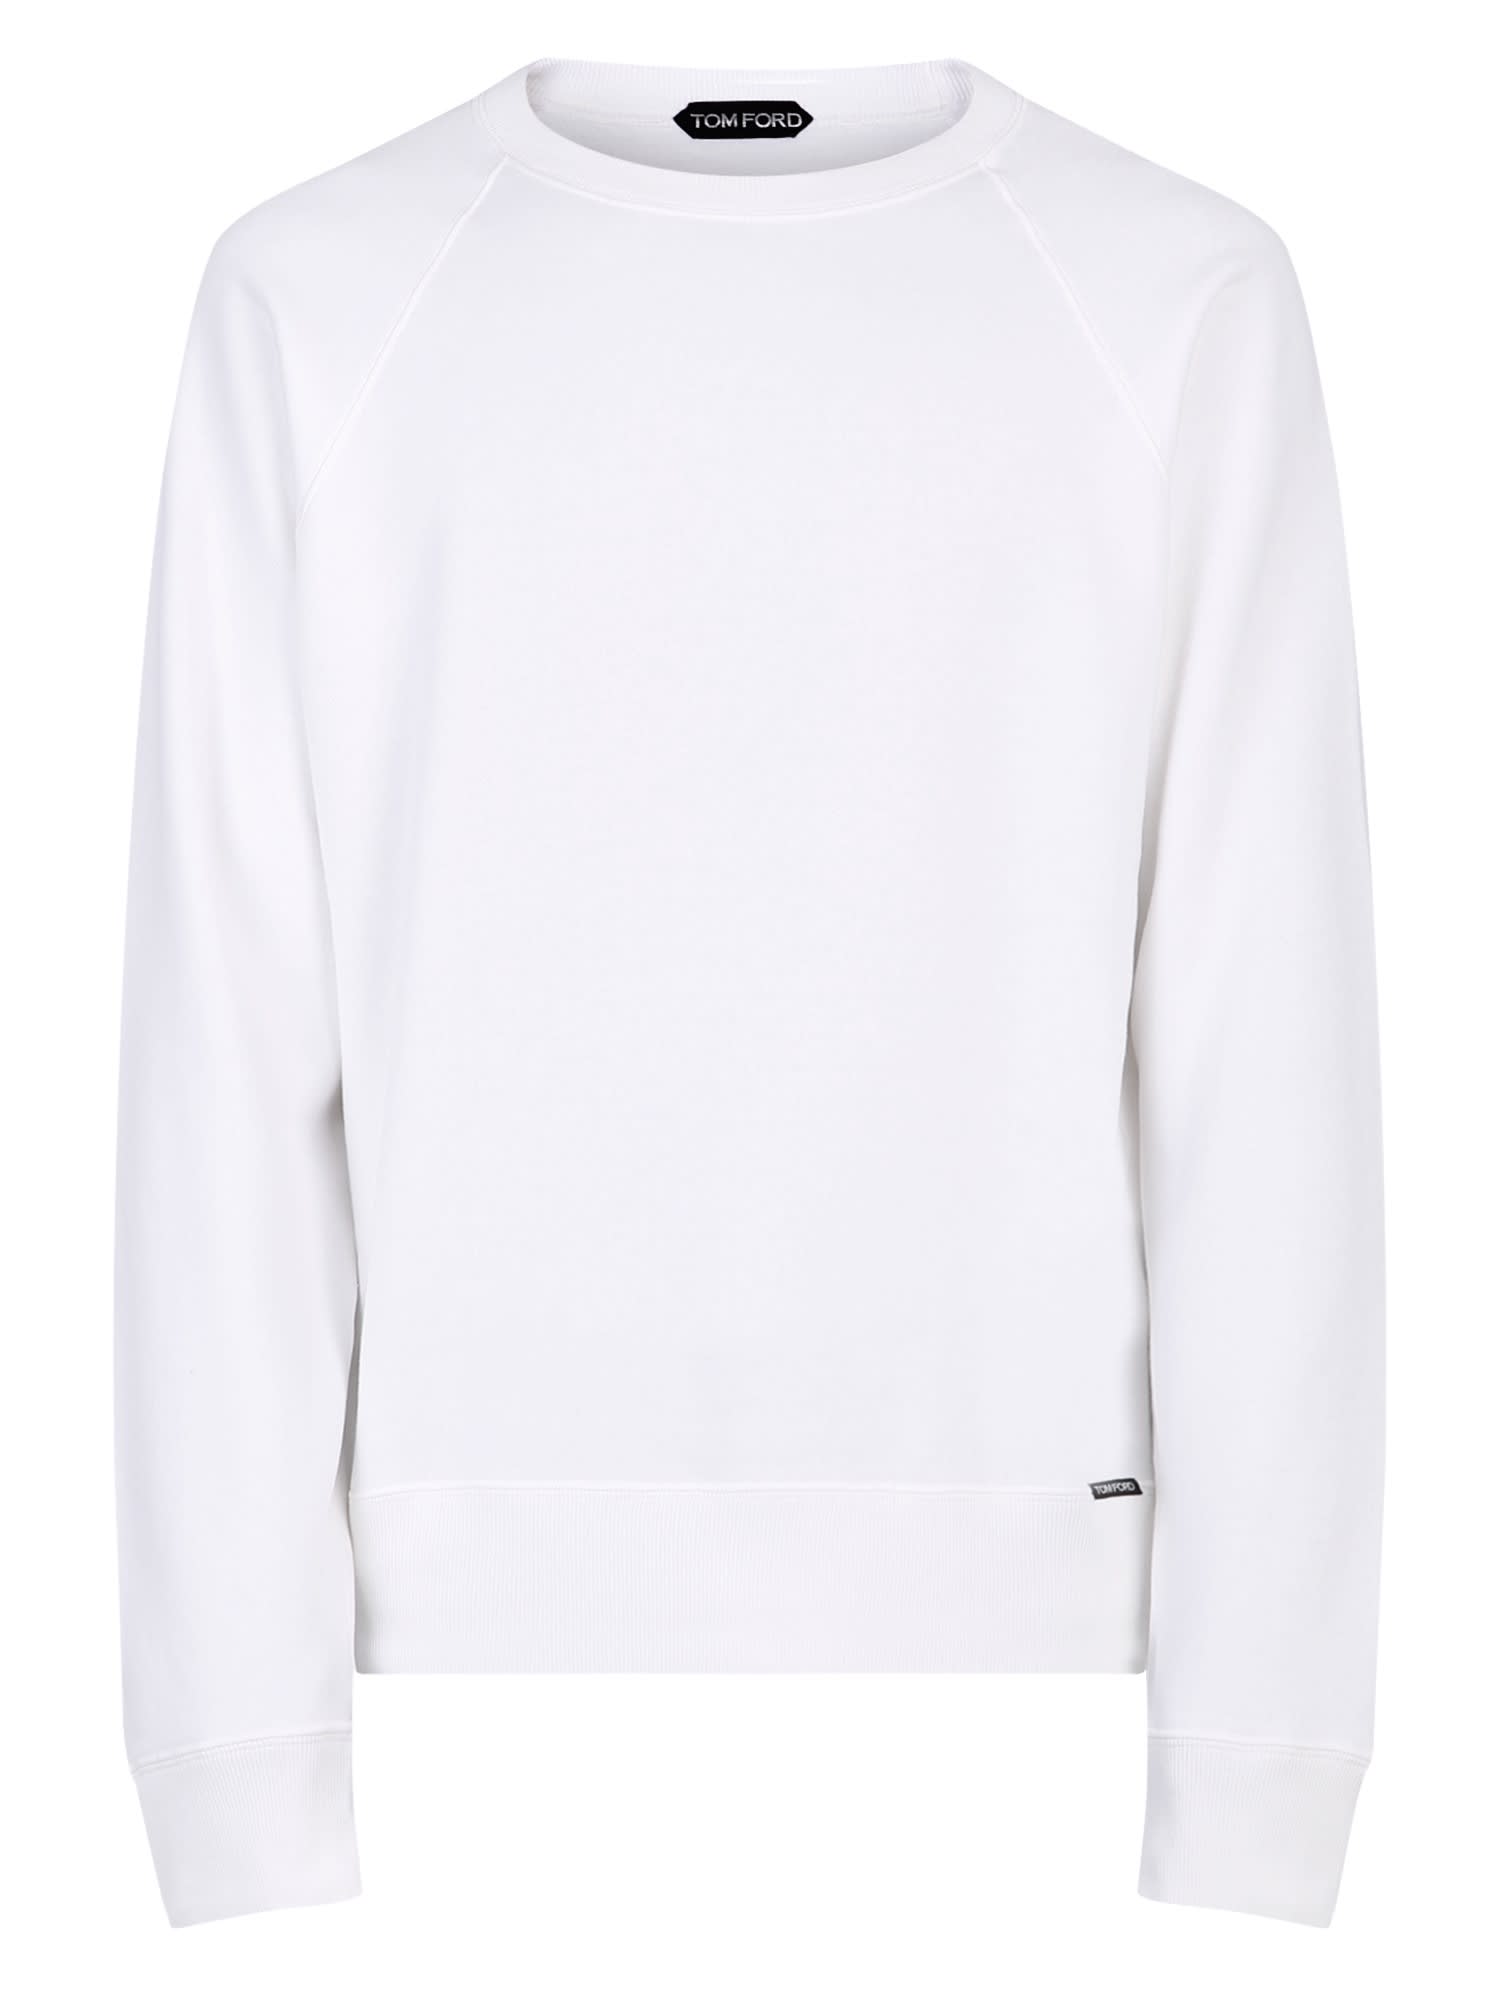 Tom Ford Relaxed Fit Sweatshirt